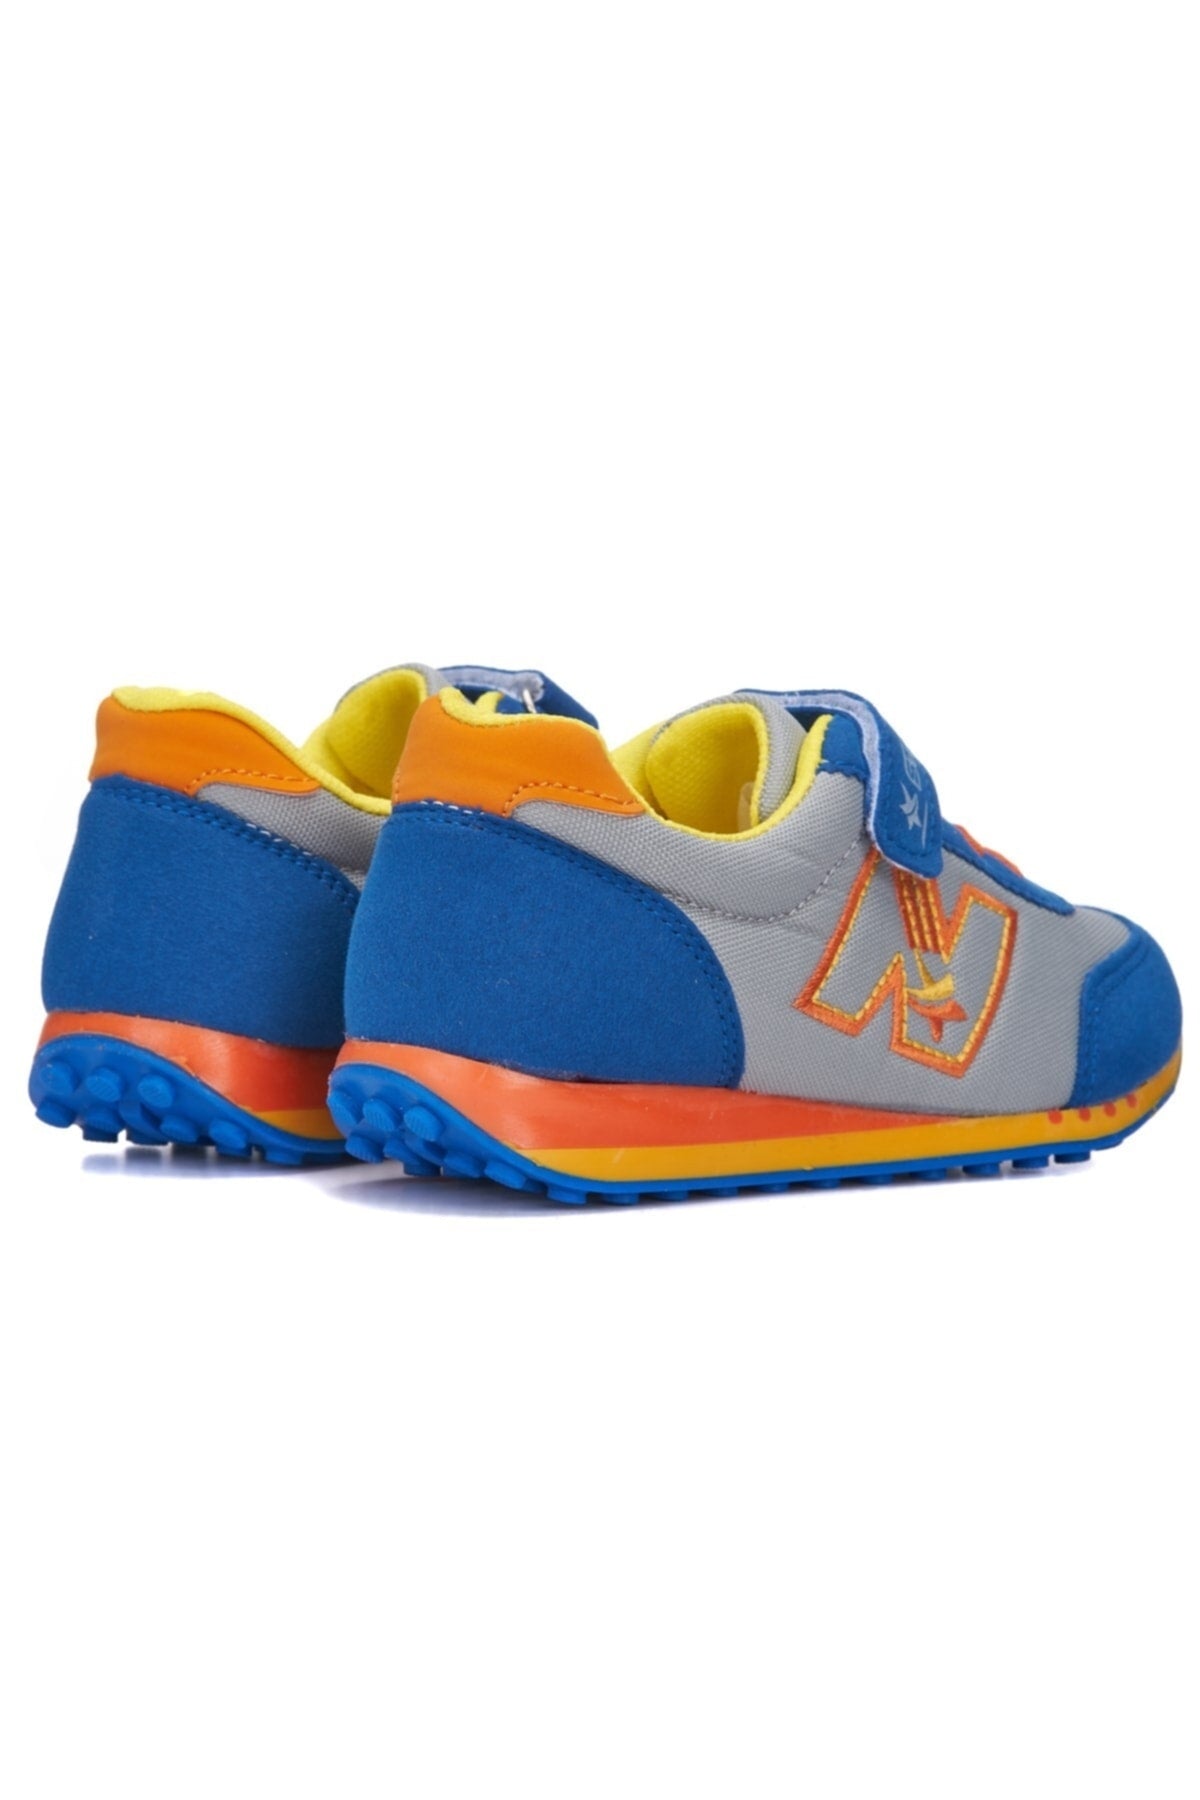 Blue - Children's Sport Shoes Call and Laced Daily Casual Sneaker